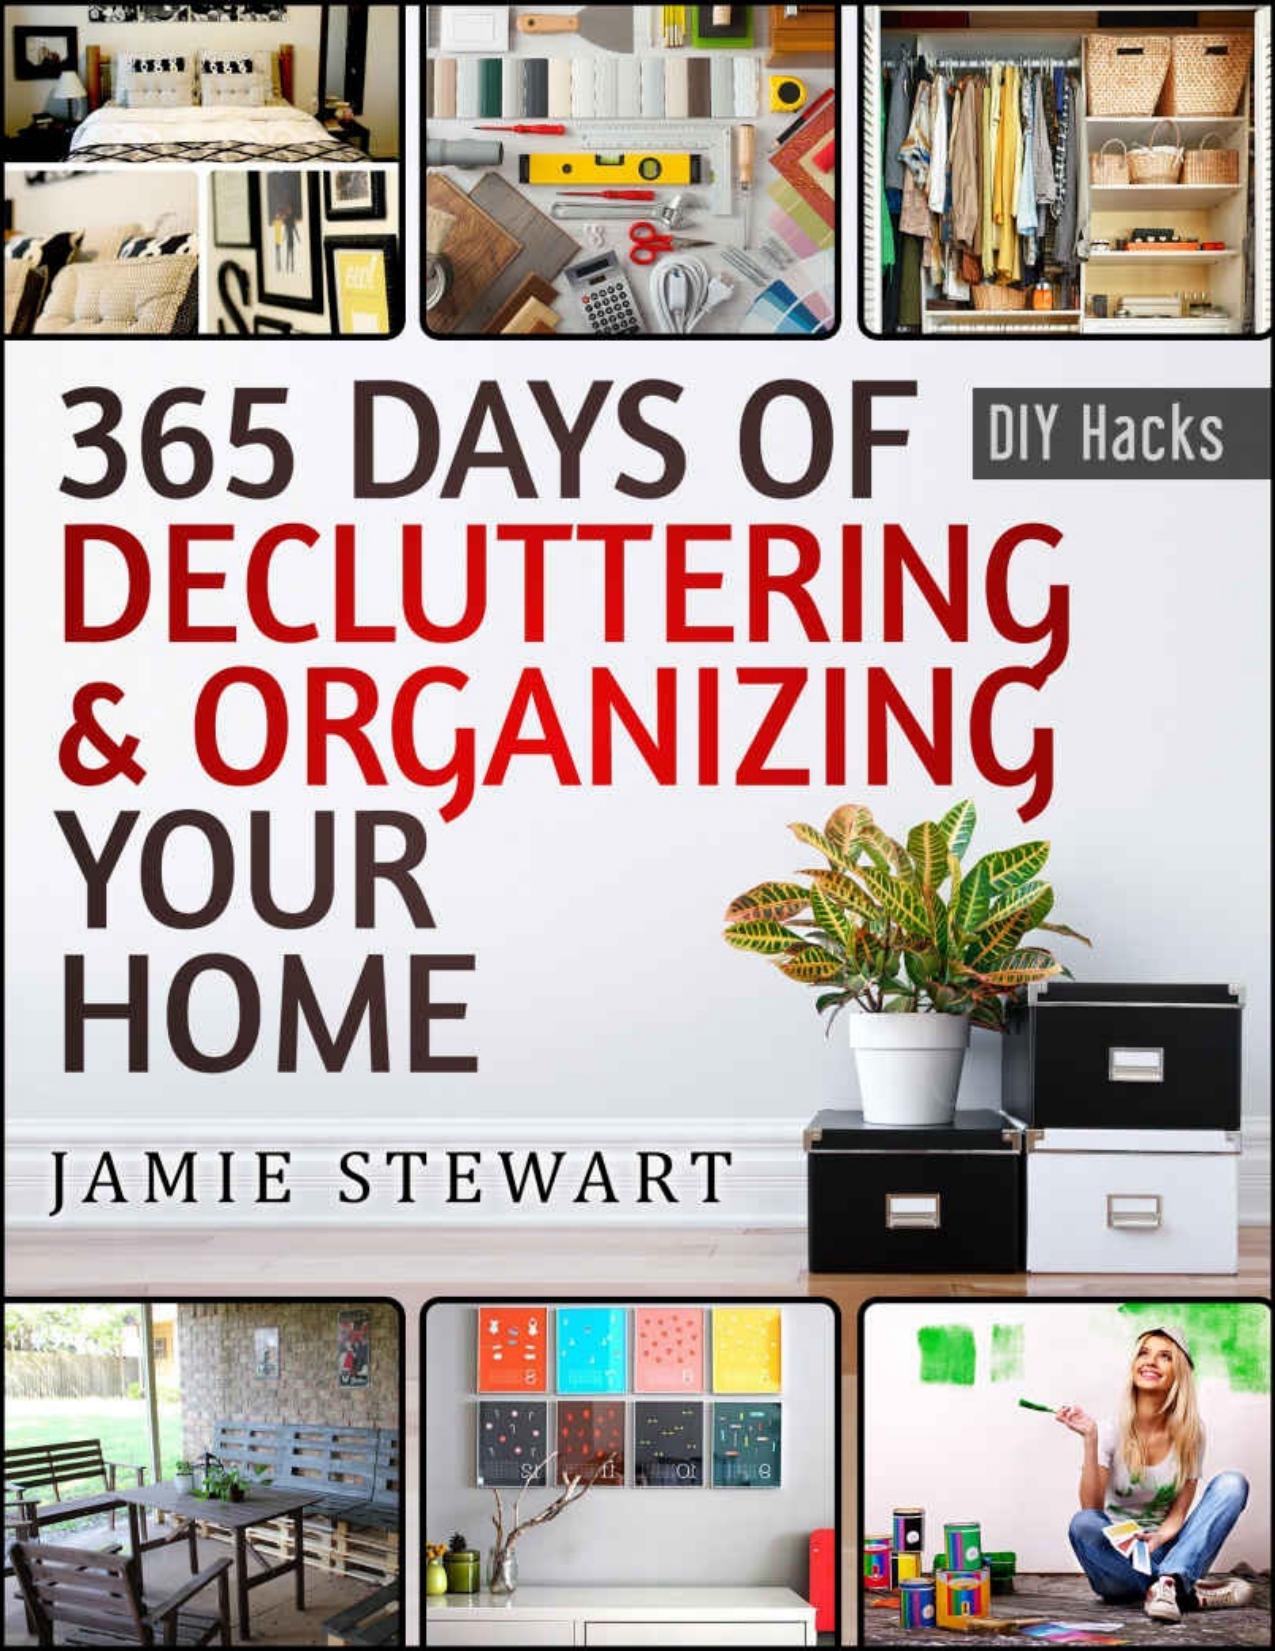 365 Days of Decluttering and Organizing Your Home \(DIY Hacks Book 1\) - PDFDrive.com